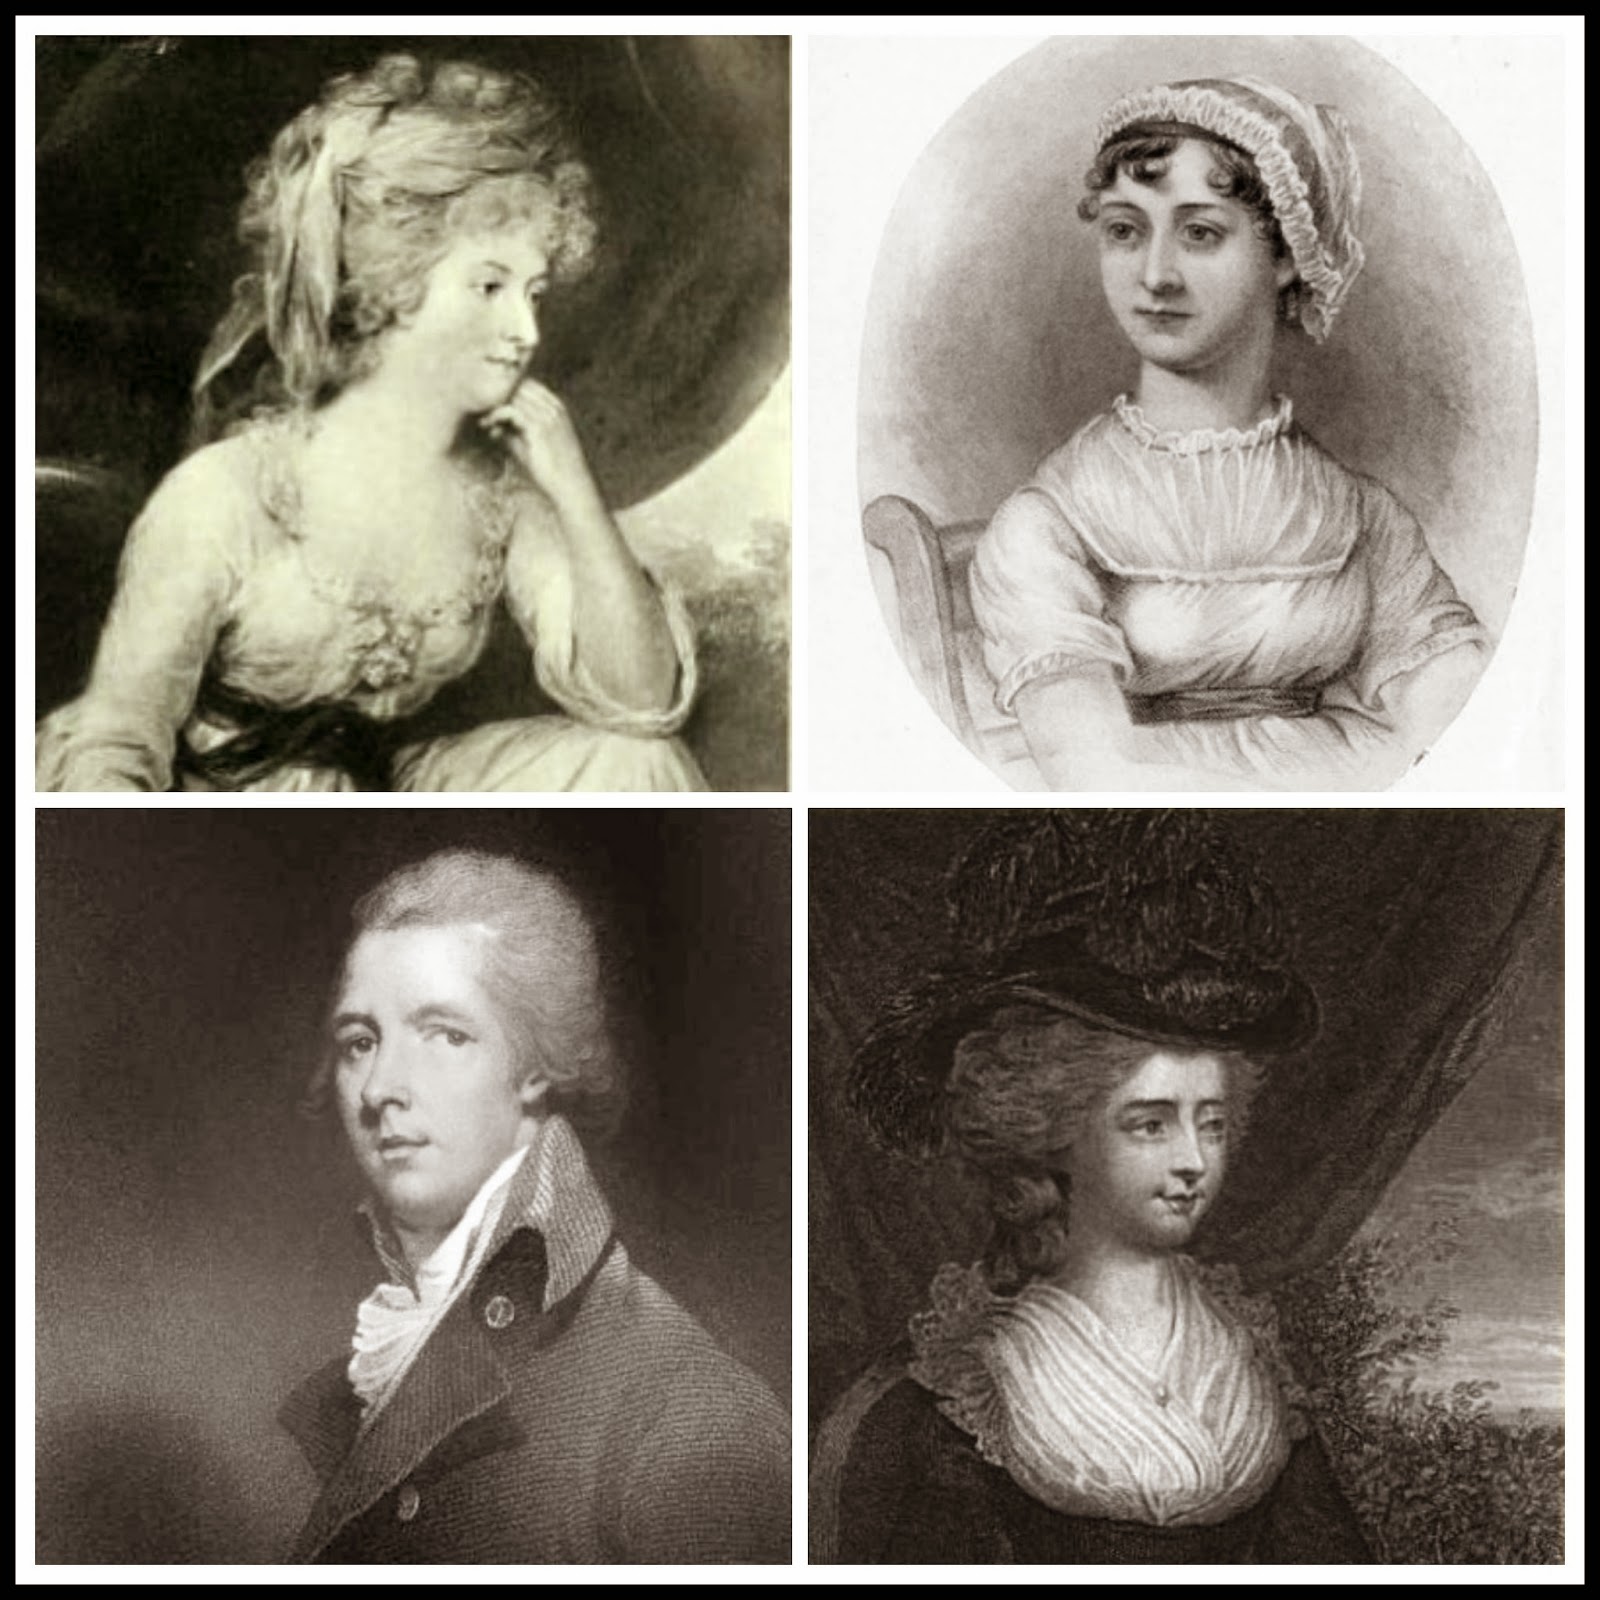 Mrs Fitzherbert from The Creevey Papers (1904); Jane Austen from A Memoir of Jane Austen by JE Austen Leigh (1871)  William Pitt from Memoirs of George IV by R Huish (1830)  Fanny Burney from Diary and letters of Madame D'Arblay (1846)